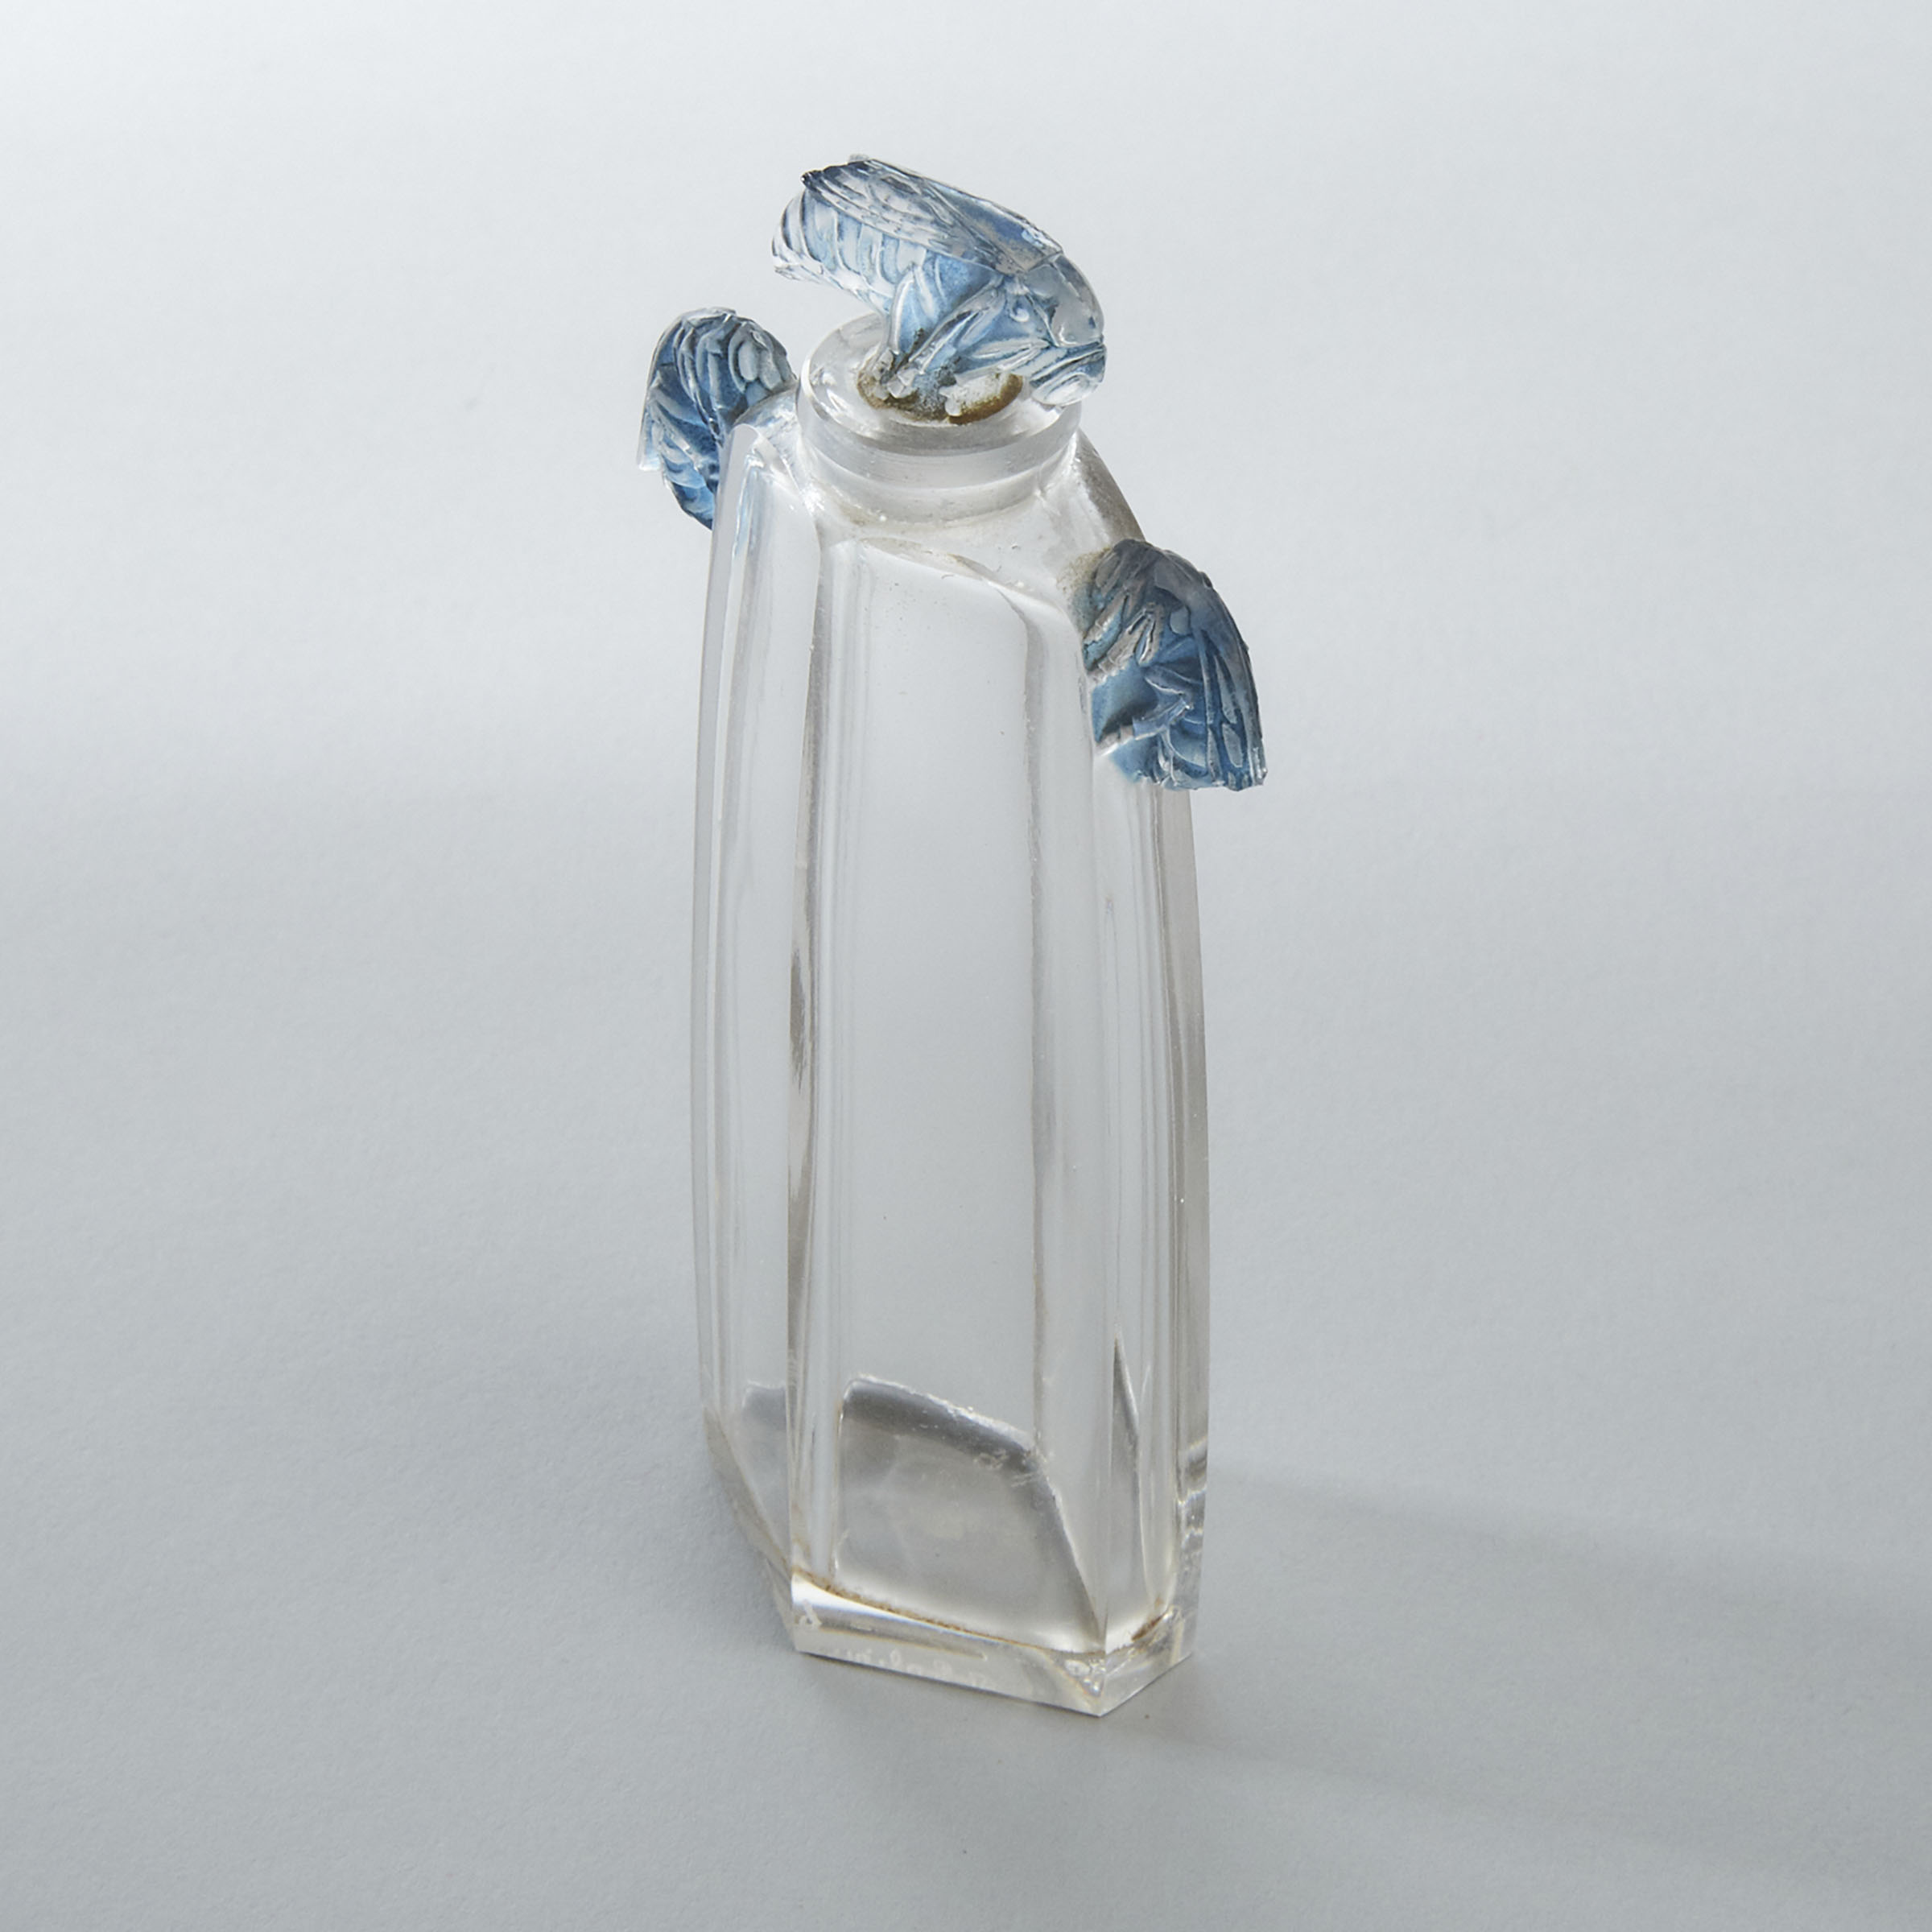 'Trois Guêpes', Lalique Moulded and Stained Blue Enameled Glass Perfume Bottle, 1920s